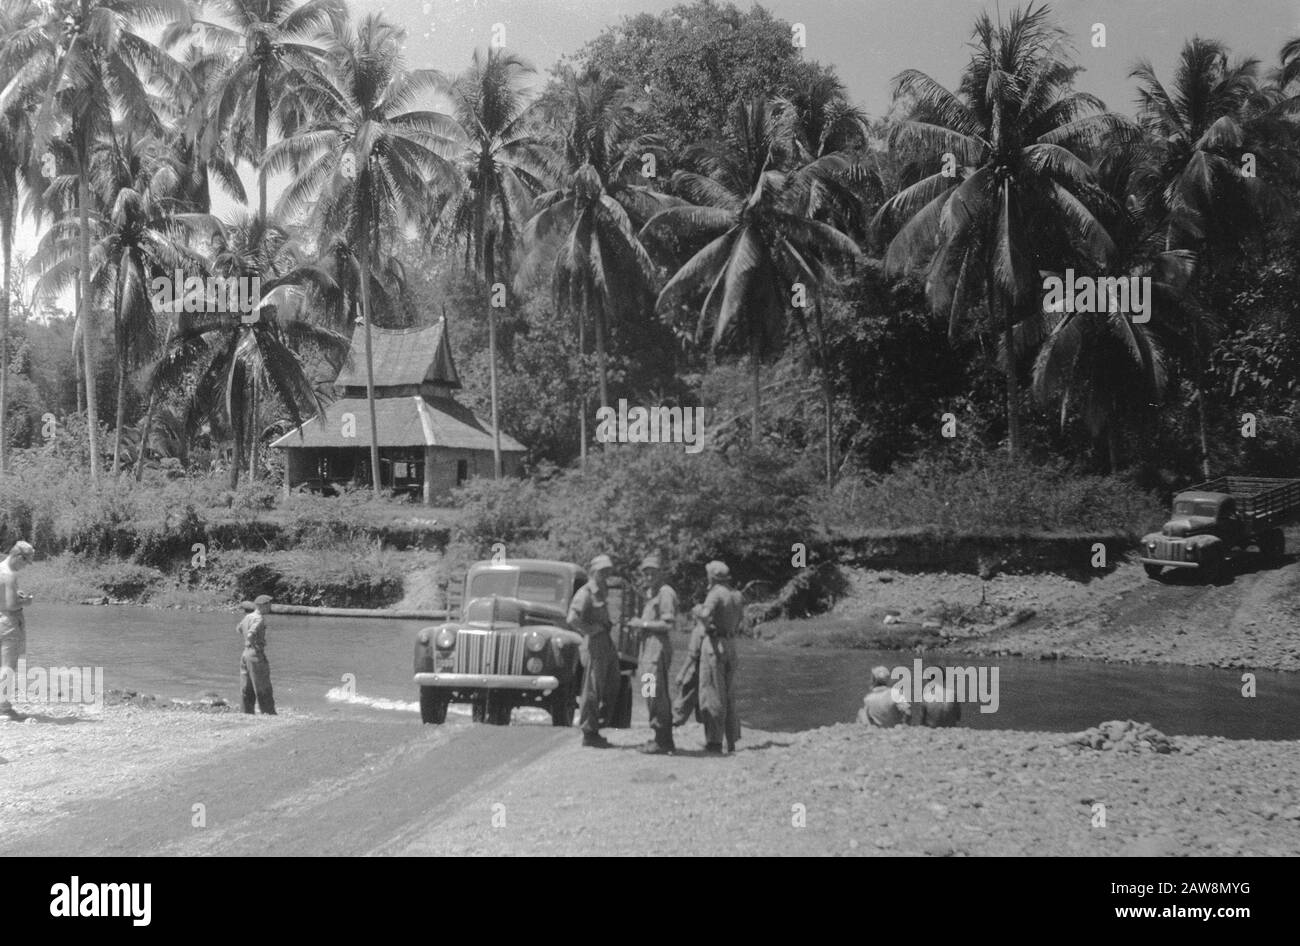 march to Fort van der Capellen and Fort de Kock (Anei Gorge)  [Army truck crosses a river at a ford over. Another is ready to stabbing over] Date: December 29, 1948 Location: Bukittinggi, Indonesia, Dutch East Indies, Sumatra Stock Photo